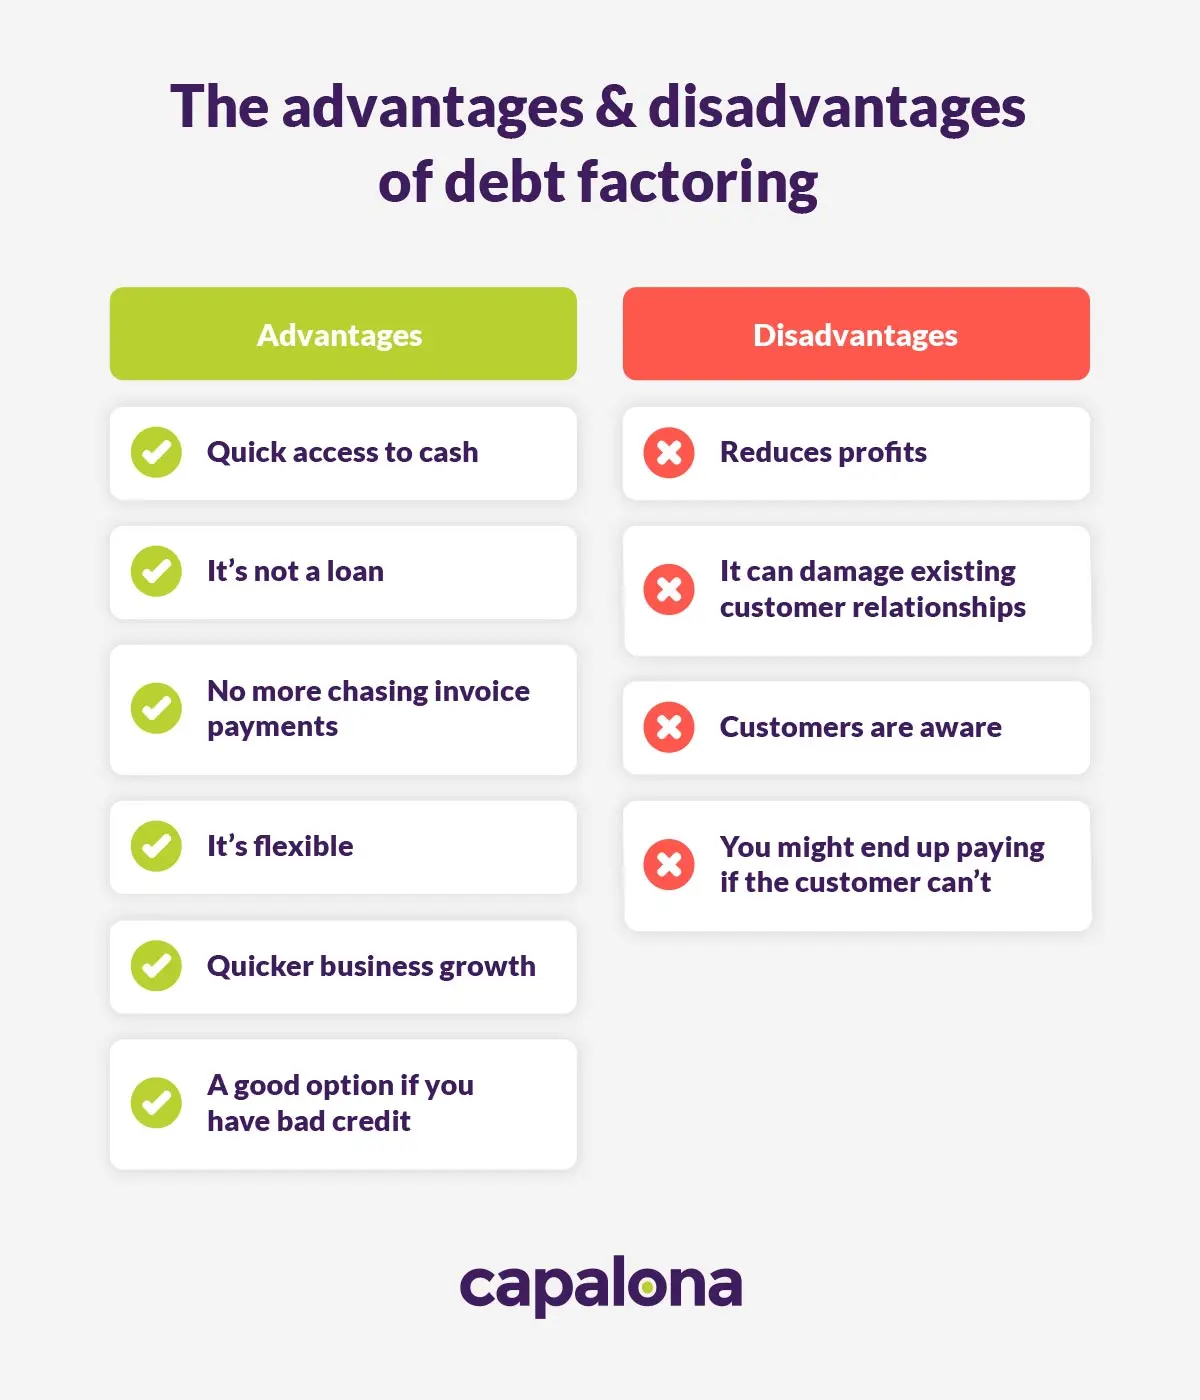 The advantages and disadvantages of debt factoring